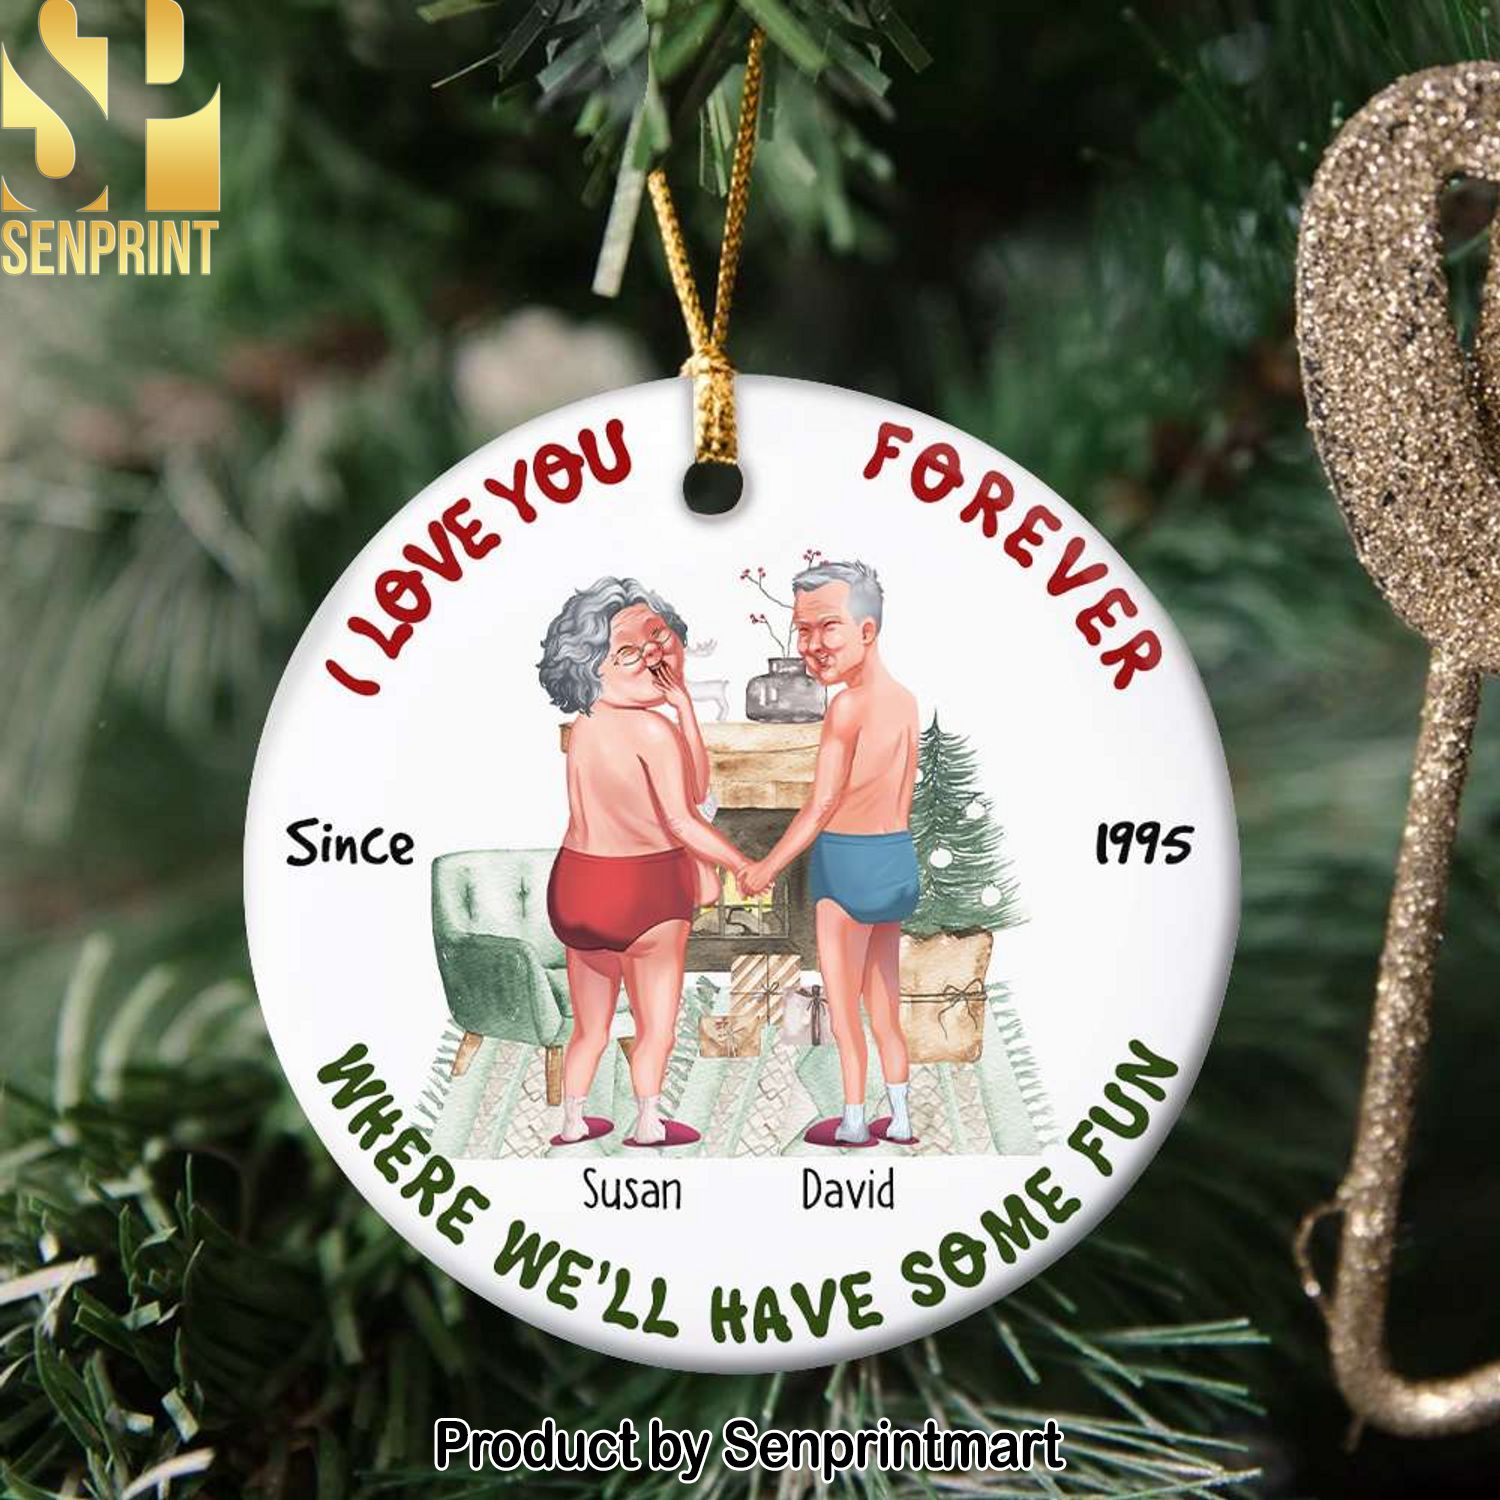 I Love You Forever, Couple Gift, Personalized Ceramic Ornament, Old Couple Ornament, Christmas Gift